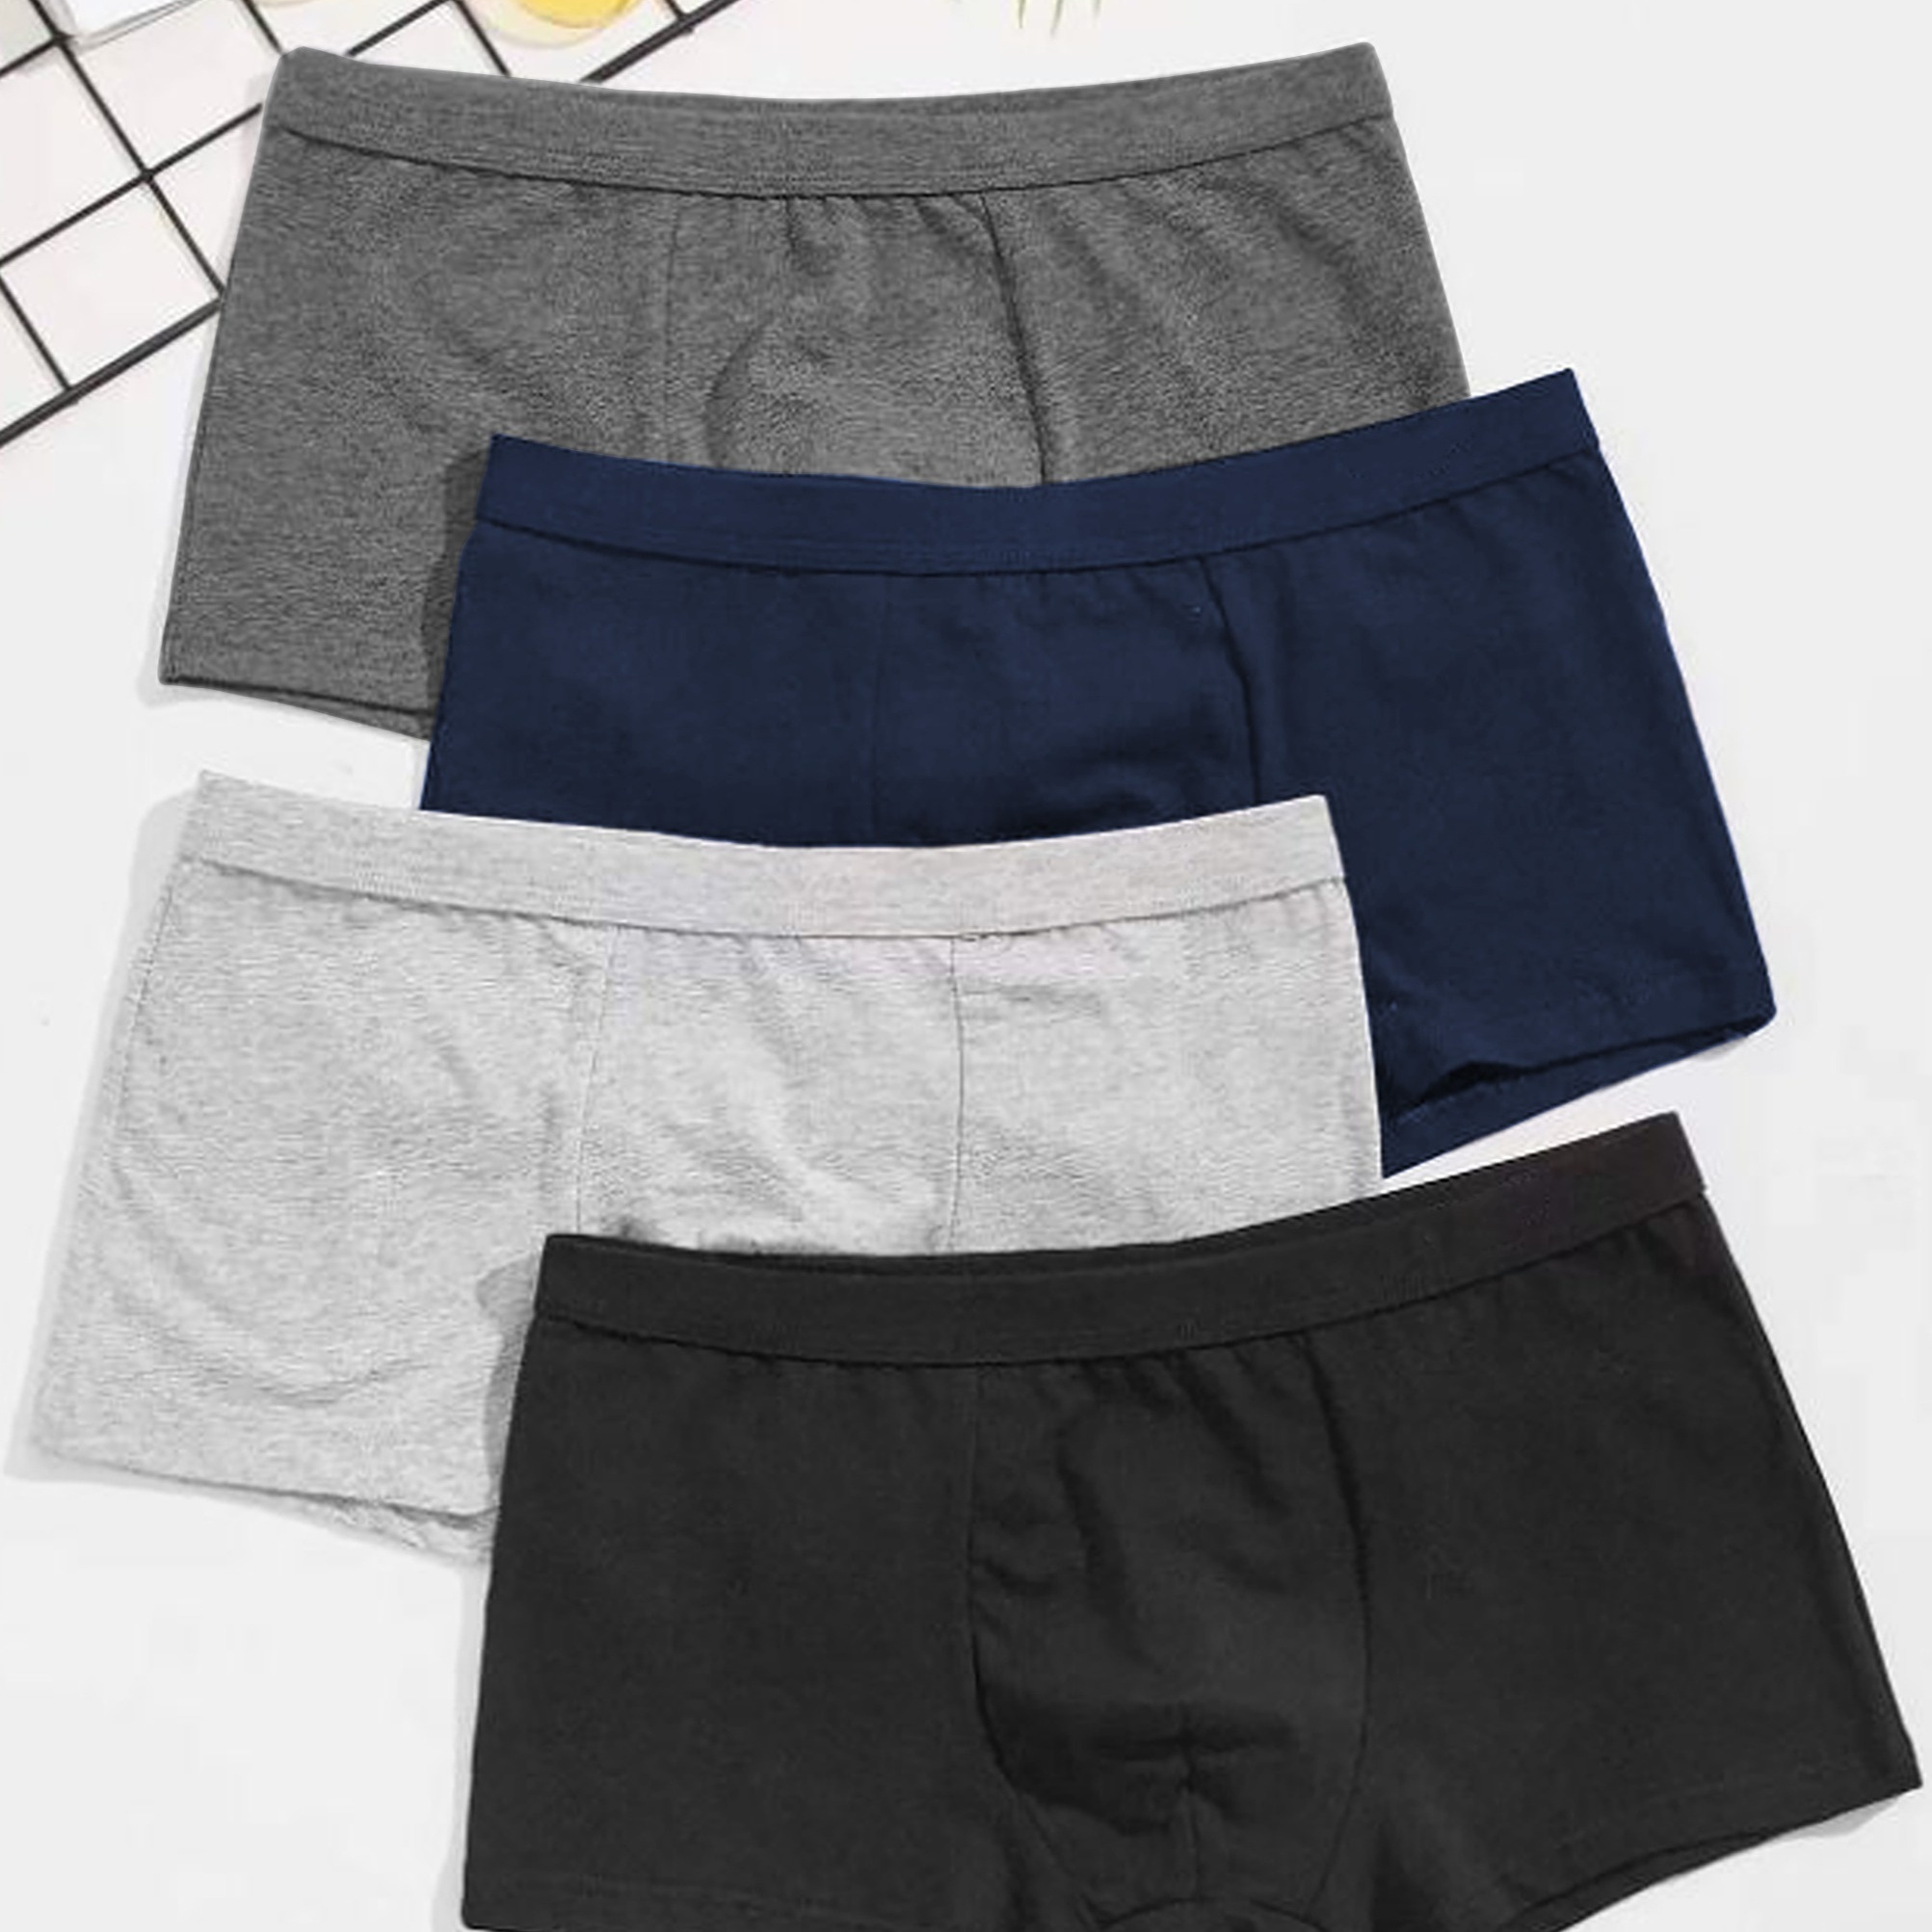 

4pcs Men's Solid Color Cotton Antibacterial Underwear, Casual Boxer Briefs Shorts, Breathable Comfy Stretchy Boxer Trunks, Sports Shorts For Spring Summer